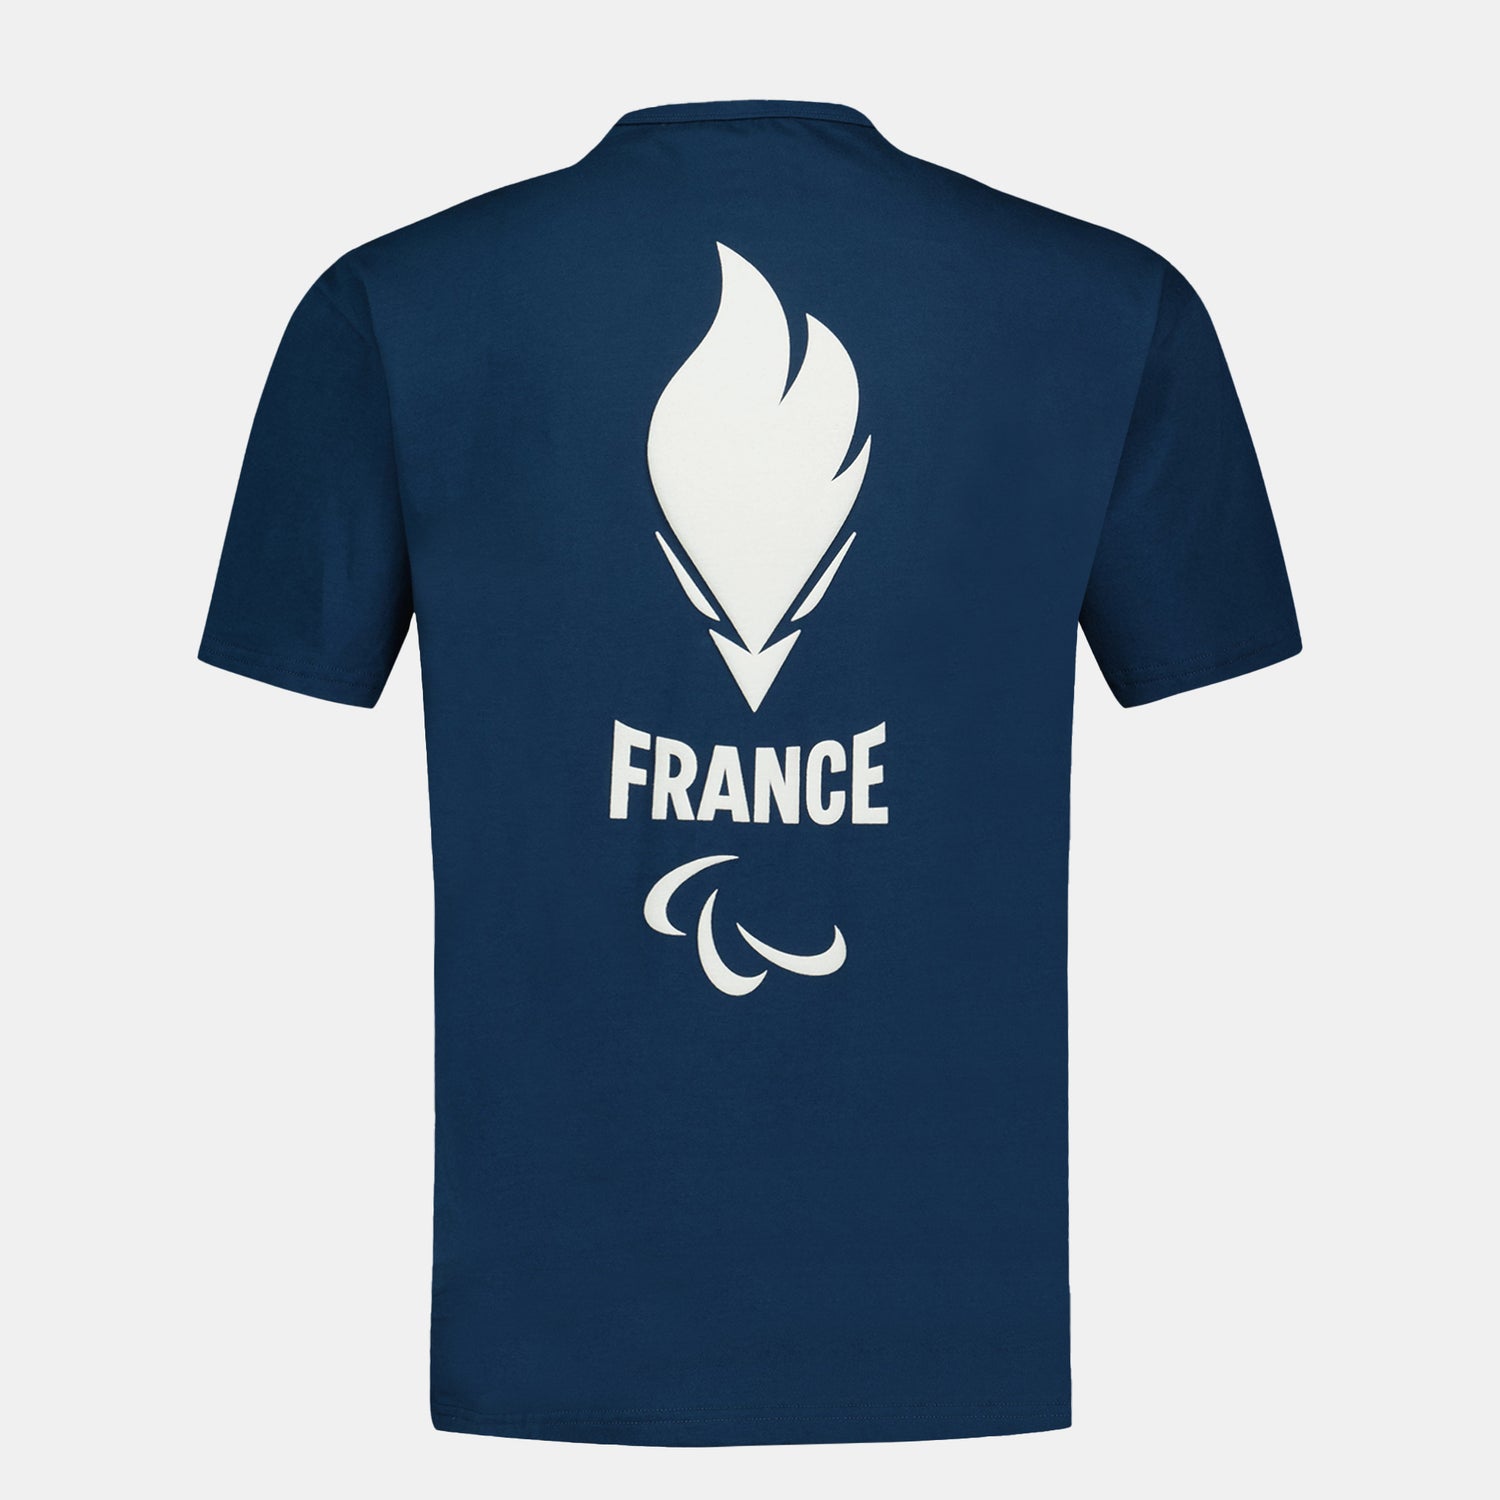 2421536-EFRP 24 Tee SS N°4 M insignia blue  | T-Shirt for men